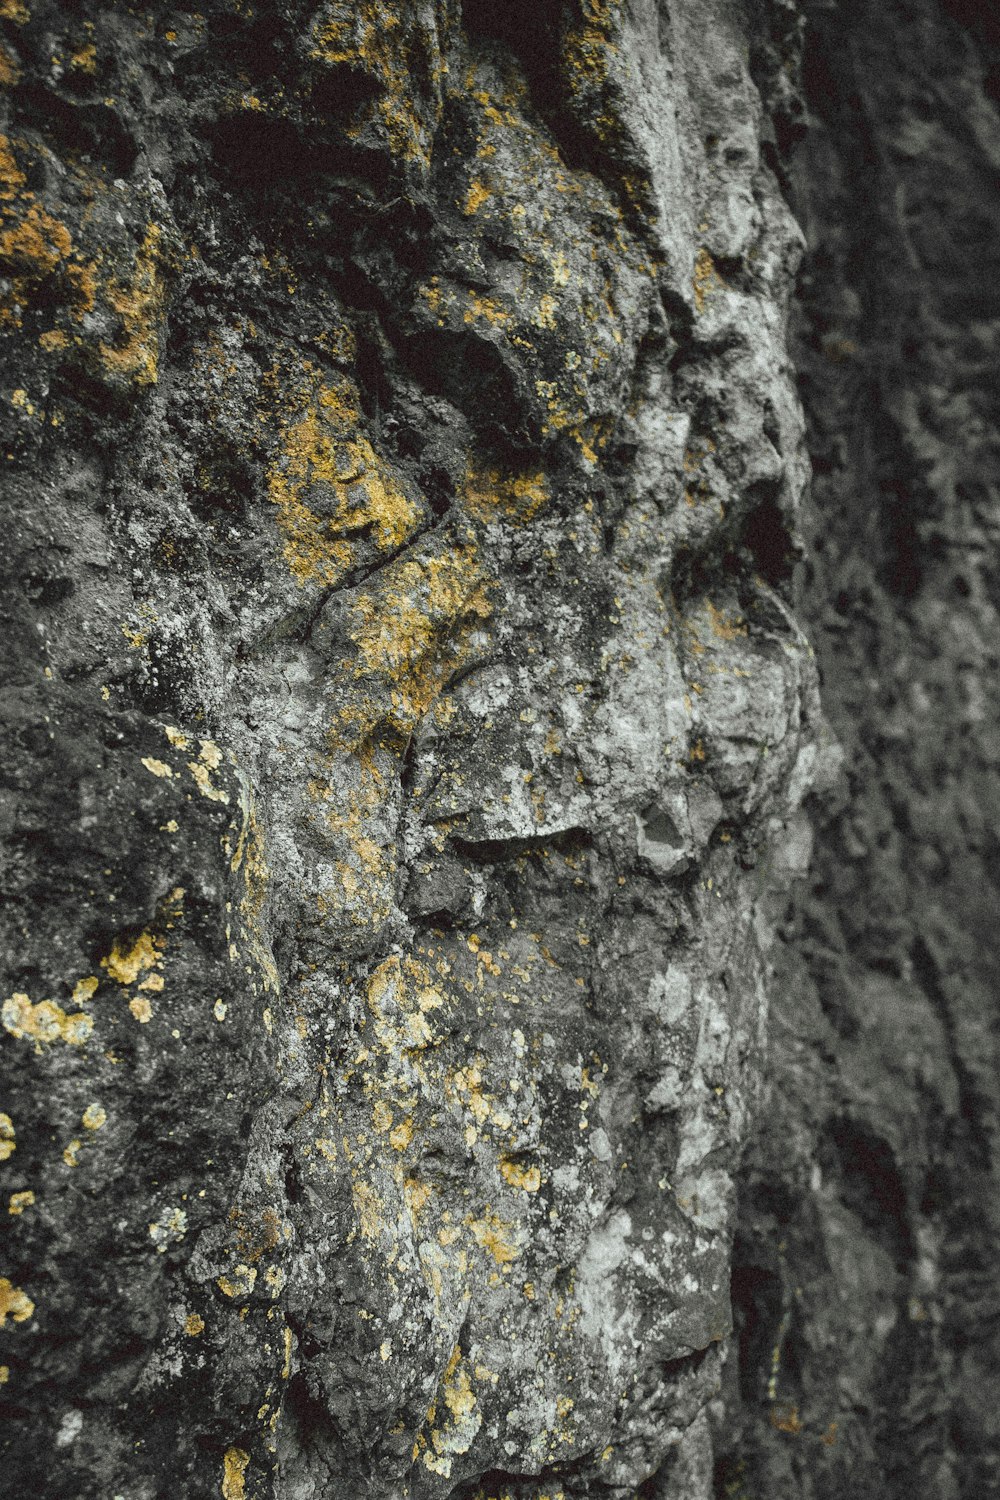 a close up of a rock face with lichen on it